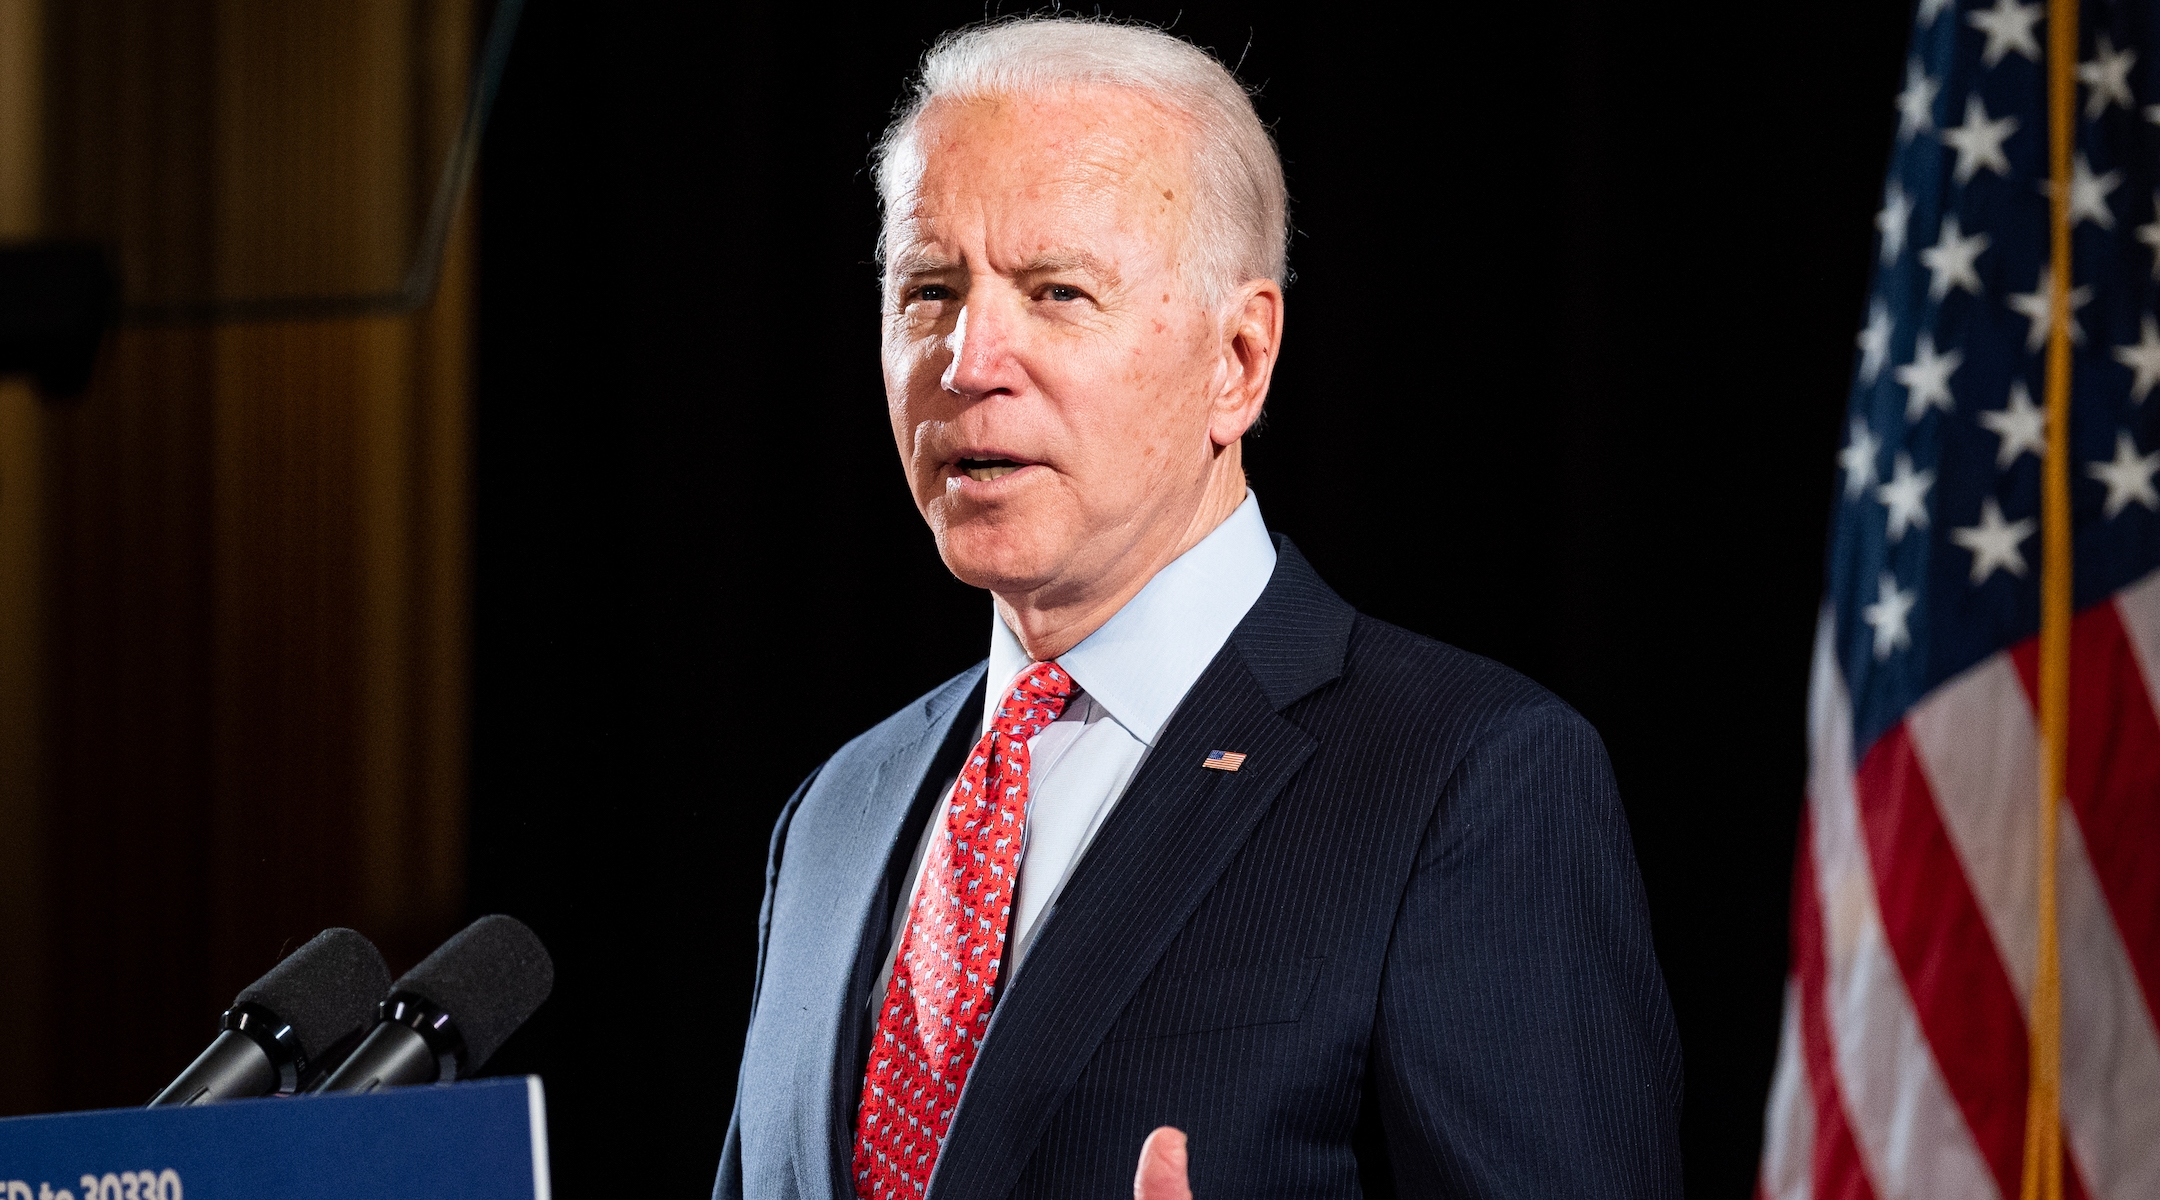 Former vice president Joe Biden-- a white man in his late 70s with silvery hair wearing a navy suit and red tie-- speaker before a podium with an American flag in the background